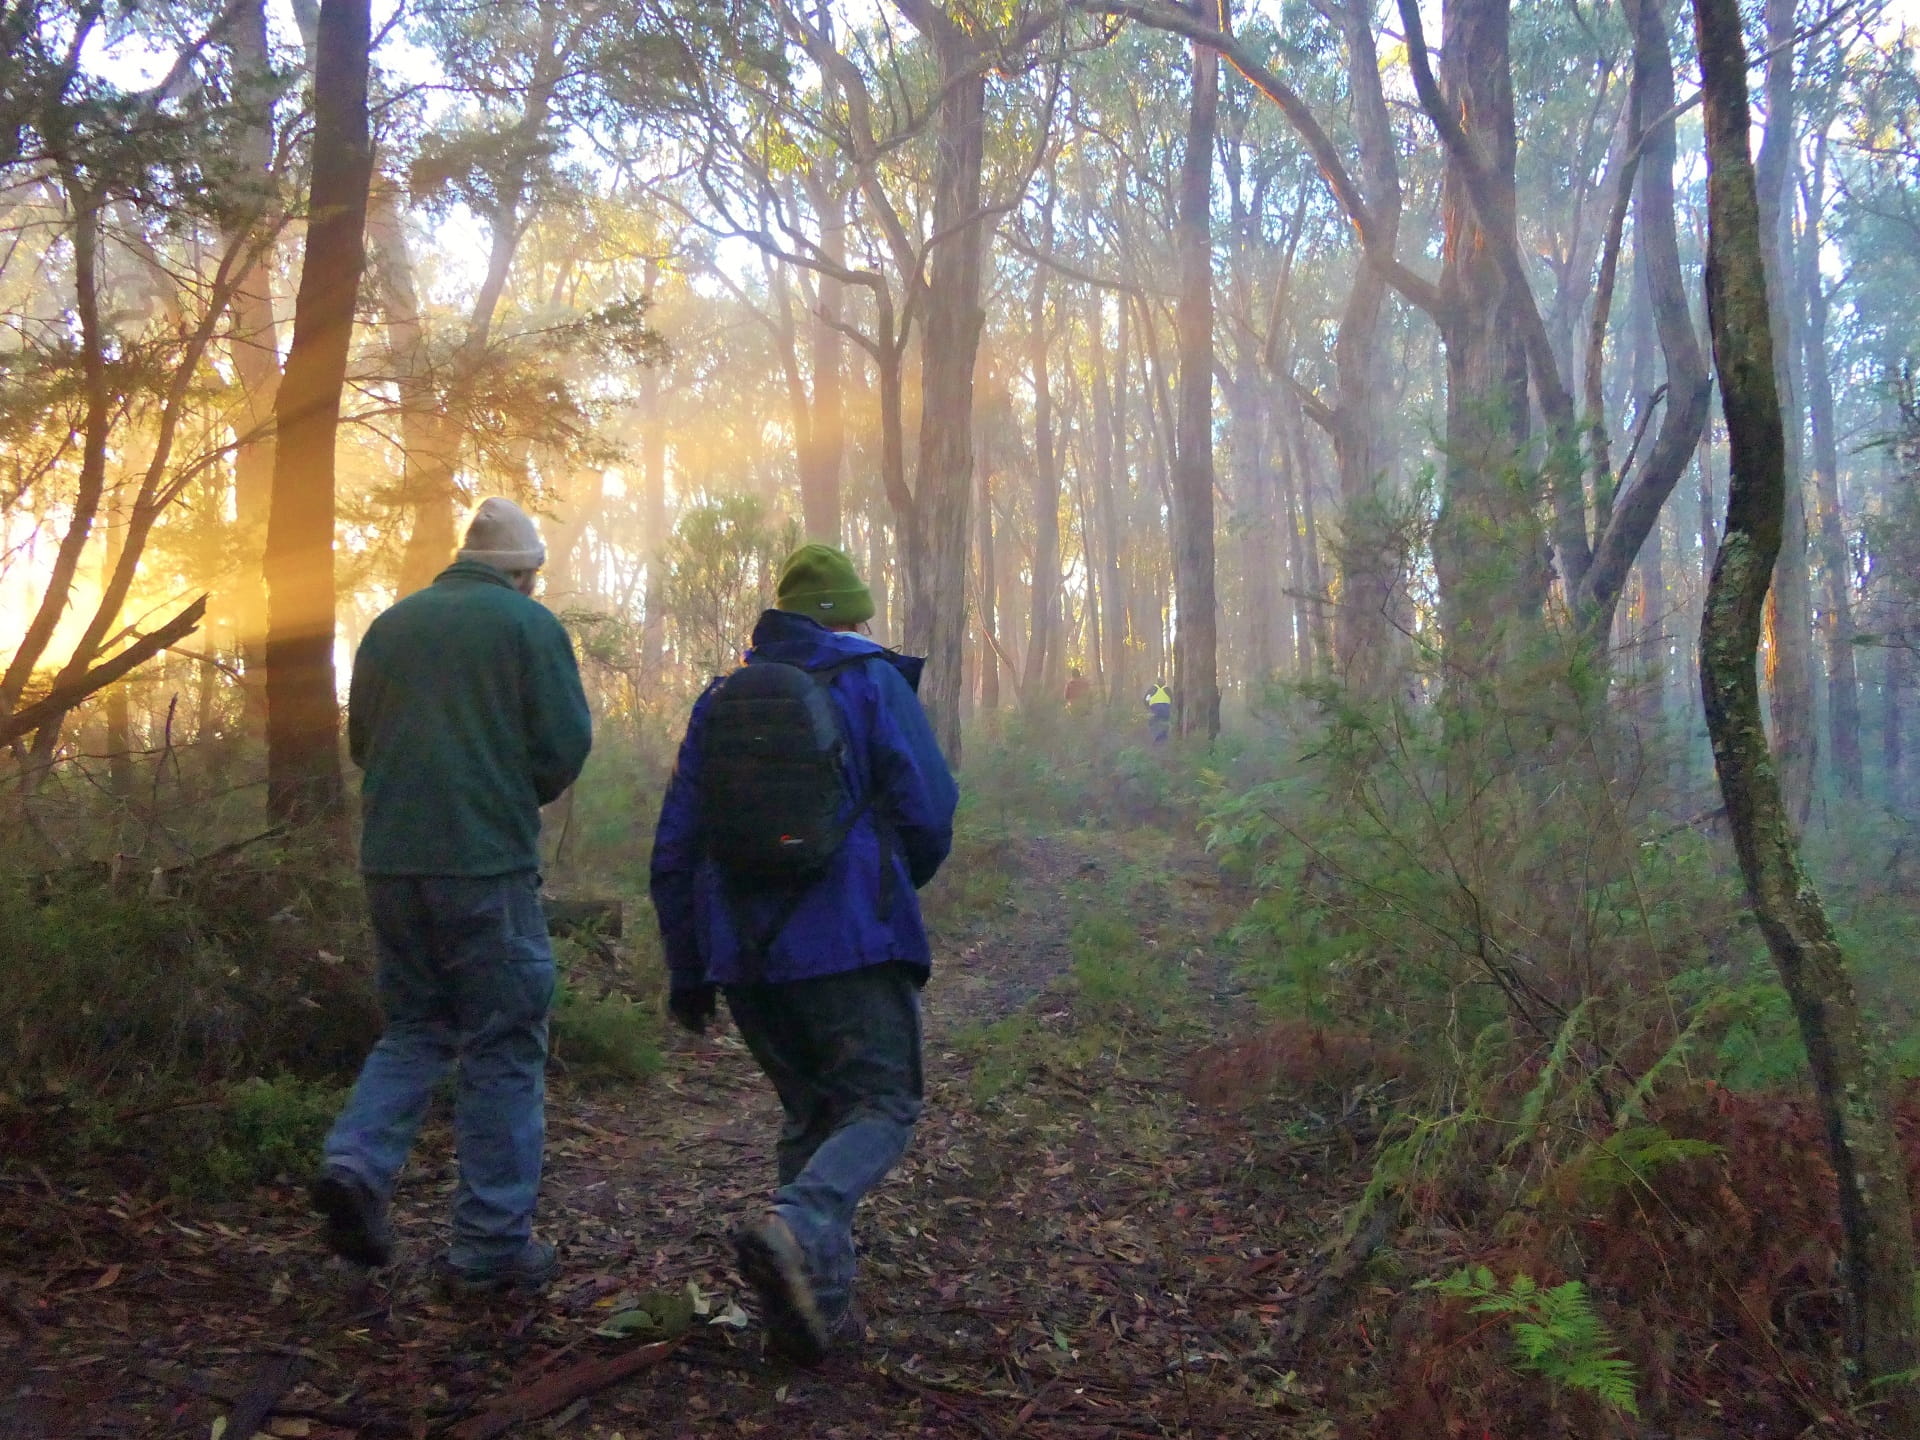 Parks Victoria staff conducting conservation work at Warramate Hills Nature Conservation Reserve